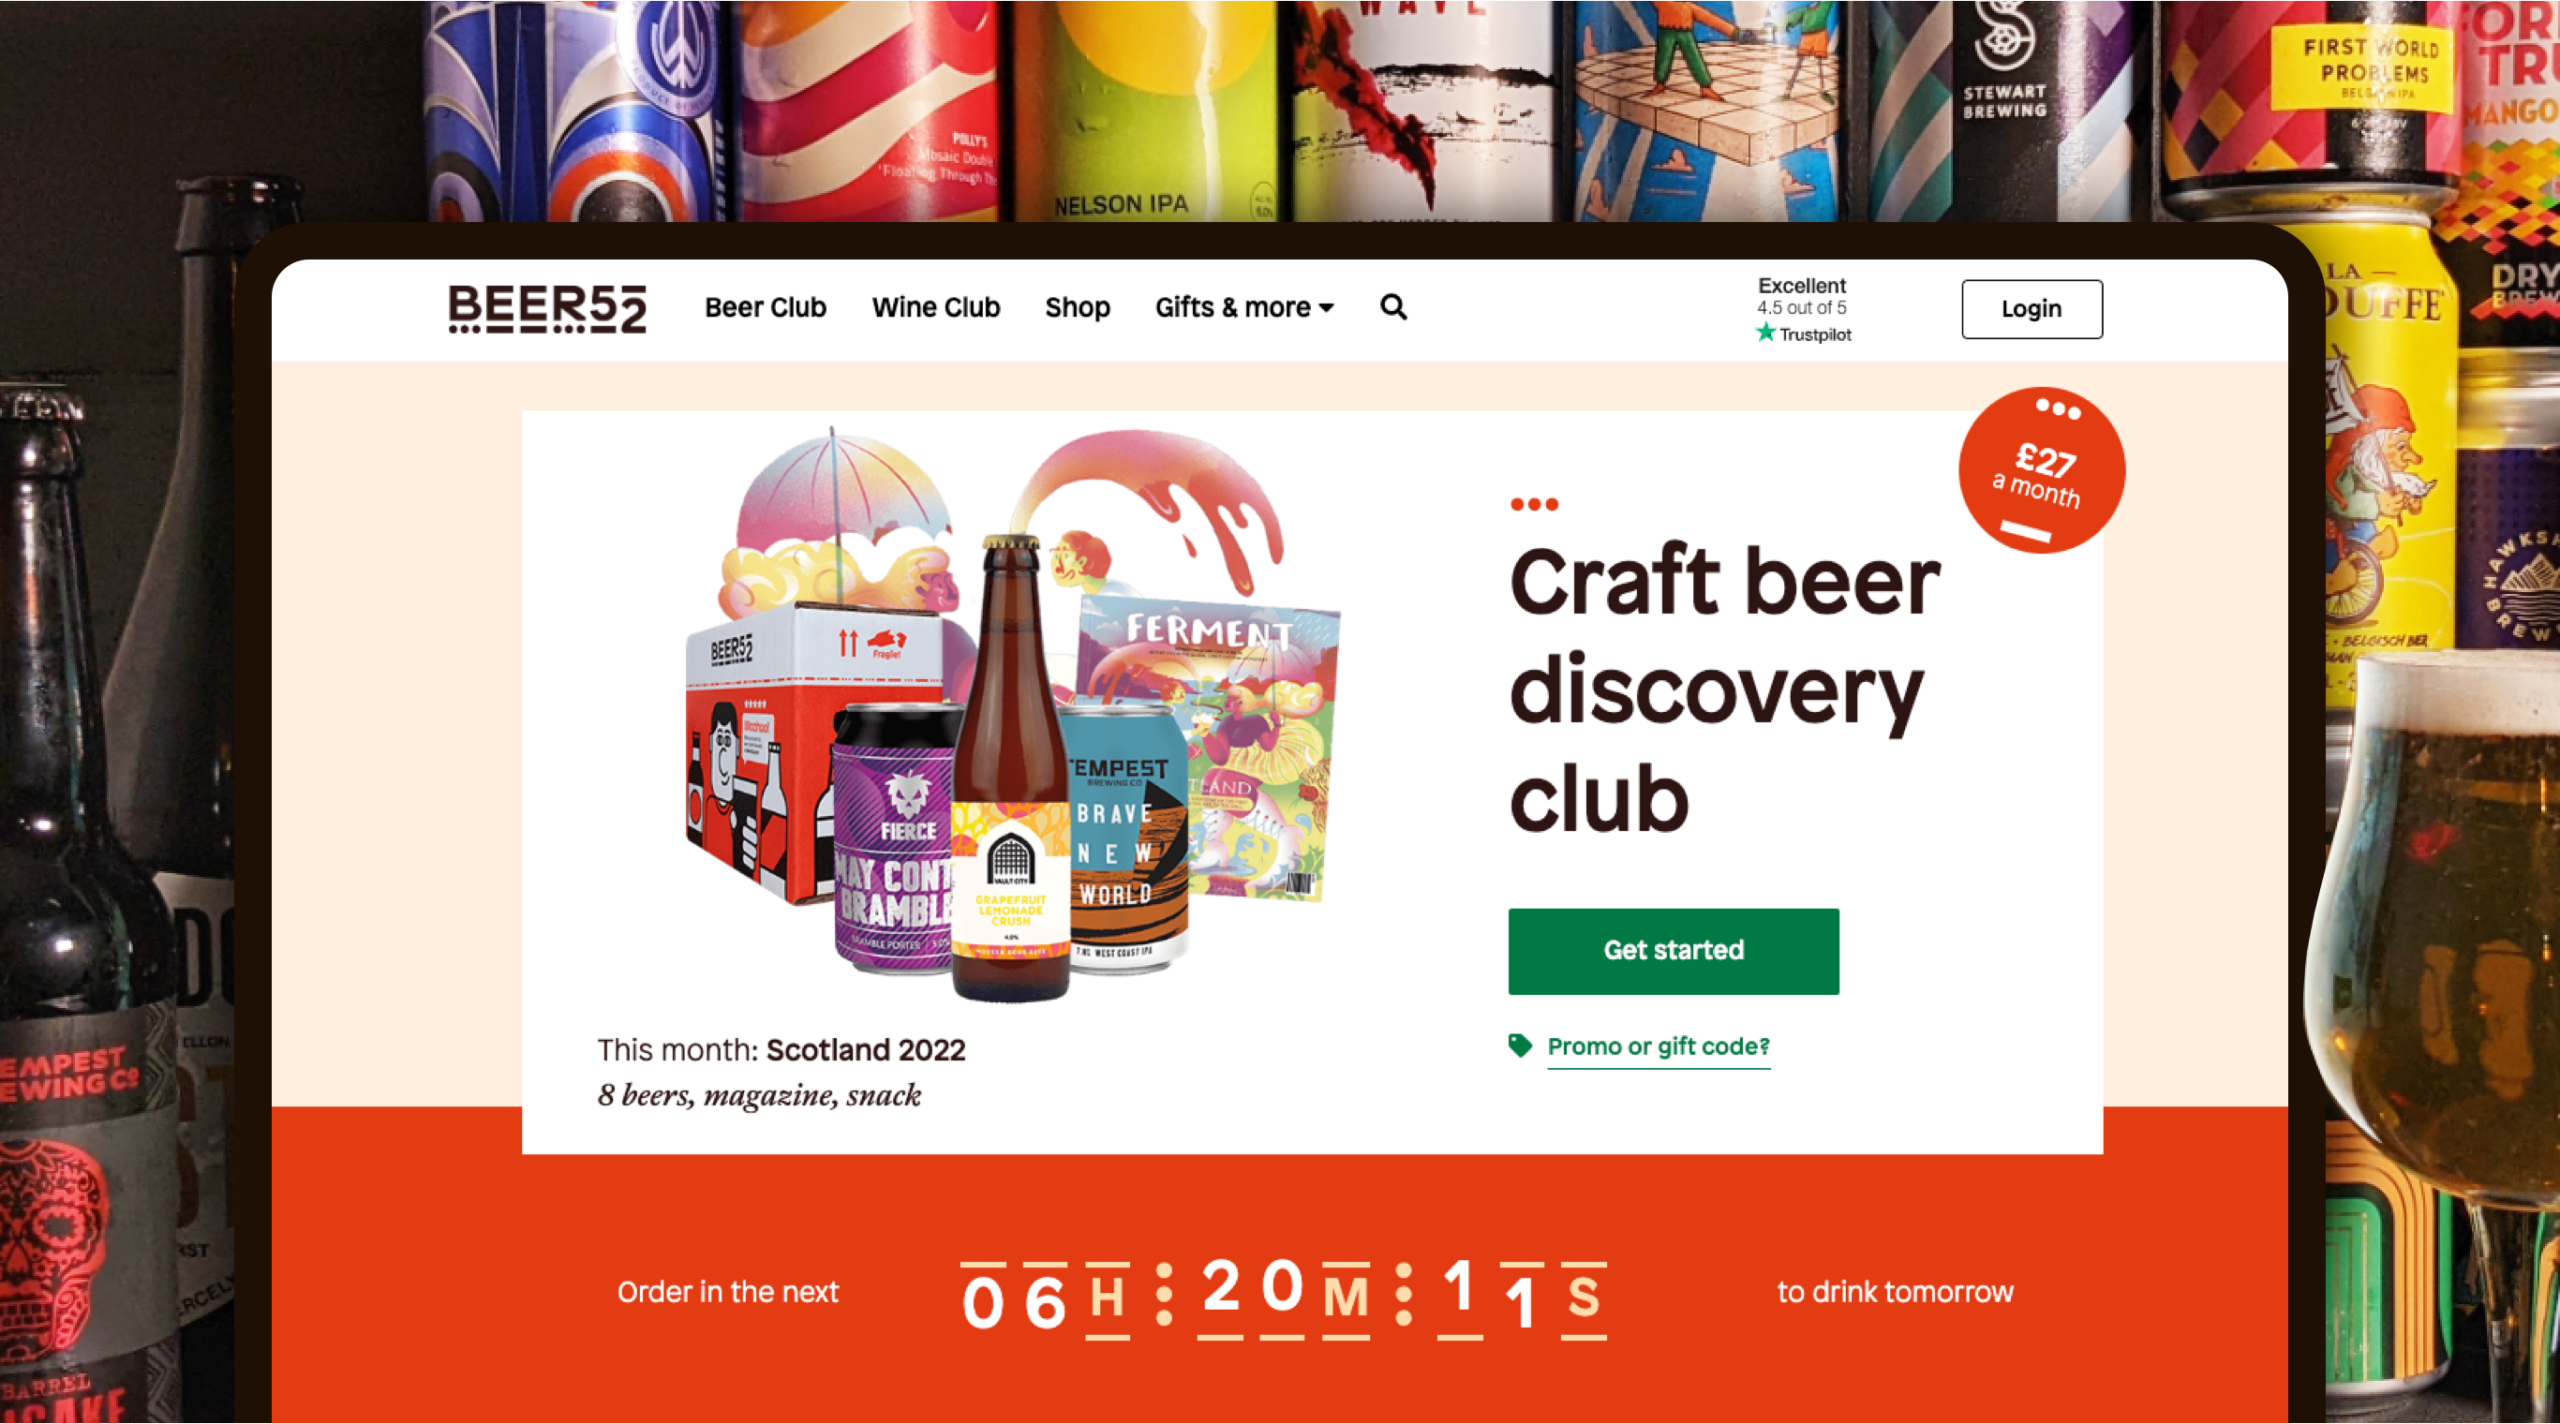 A landscape screen depicts a screenshot of the Beer52 “Craft beer discovery club ” page.